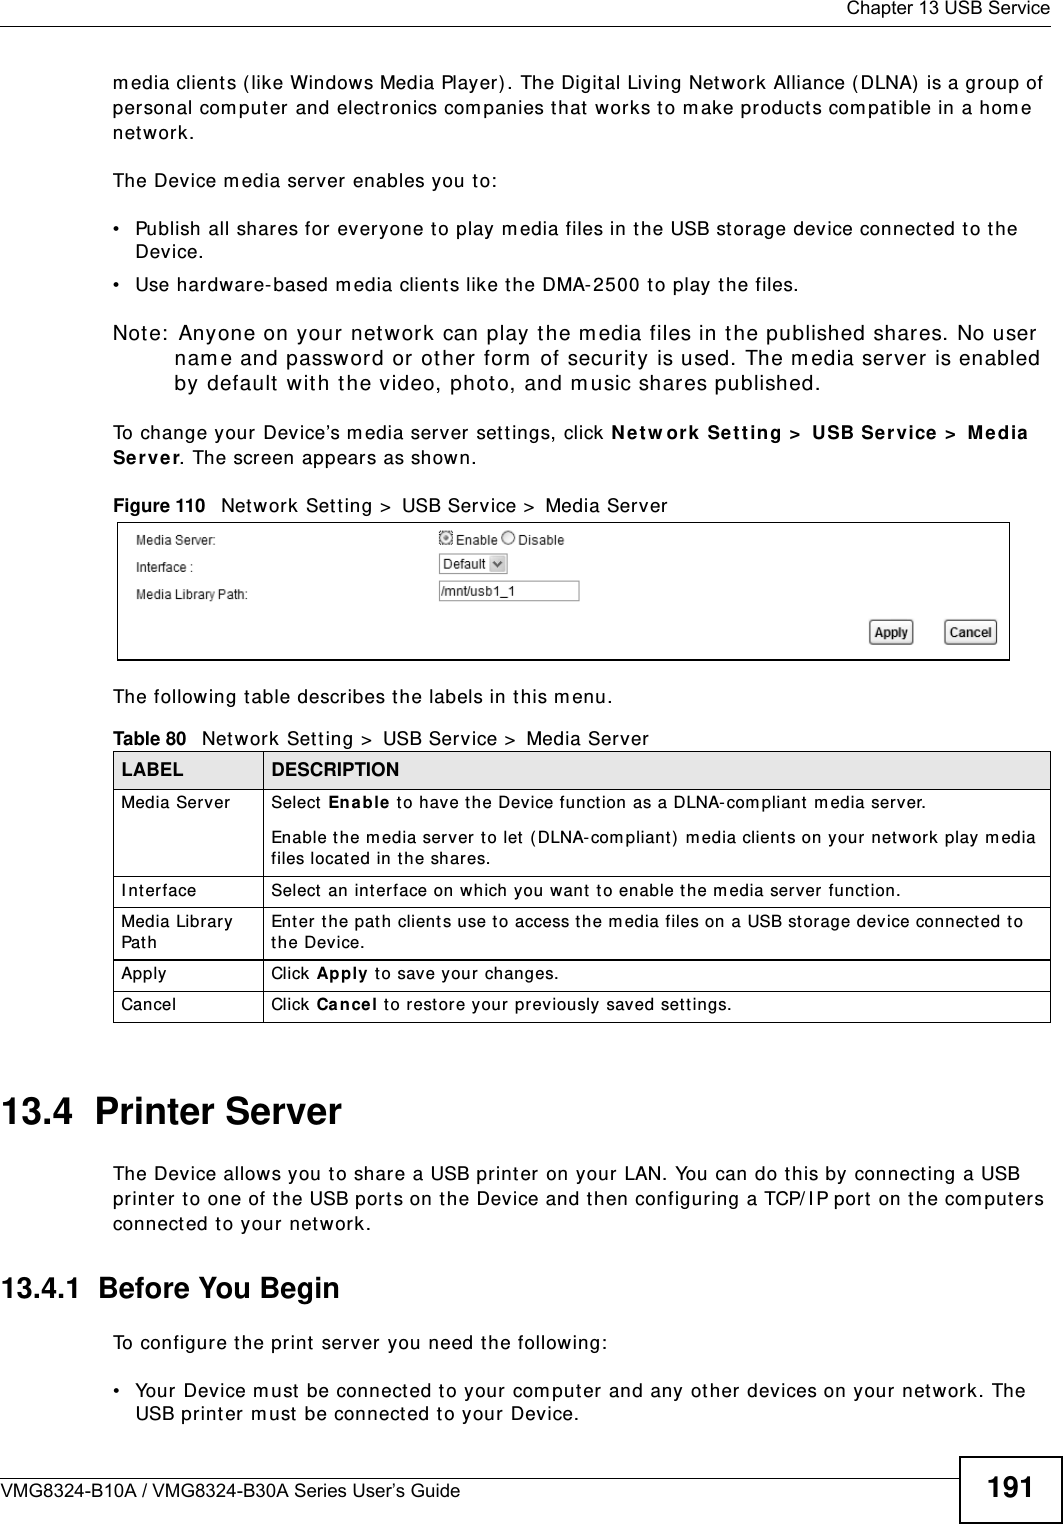  Chapter 13 USB ServiceVMG8324-B10A / VMG8324-B30A Series User’s Guide 191m edia client s ( like Windows Media Player) . The Digit al Living Net work Alliance (DLNA)  is a group of personal com put er and elect ronics com panies t hat works t o m ake product s com pat ible in a hom e net work.The Device m edia server enables you to:• Publish all shares for everyone t o play m edia files in the USB storage device connect ed to the Device.• Use hardware- based m edia client s like the DMA- 2500 t o play t he files. Not e:  Anyone on your net work can play the m edia files in t he published shares. No user nam e and passwor d or ot her form  of securit y is used. The m edia ser ver is enabled by default w it h t he video, phot o, and m usic shares published. To change your Device’s m edia server set t ings, click Ne t w or k  Se t t ing &gt;  USB Service &gt;  Me dia Se r v e r. The scr een appears as shown.Figure 110   Net work Sett ing &gt;  USB Service &gt;  Media ServerThe following t able describes t he labels in this m enu.13.4  Printer Server The Device allows you t o shar e a USB print er on your LAN. You can do t his by connecting a USB print er t o one of the USB por t s on t he Device and t hen configuring a TCP/ I P port  on t he com put ers connect ed to your net w ork. 13.4.1  Before You BeginTo configure t he print server you need t he follow ing:• Your Device m ust  be connect ed t o your com put er and any ot her devices on your net work. The USB print er m ust  be connected to your Device.Table 80   Net work Sett ing &gt;  USB Service &gt;  Media ServerLABEL DESCRIPTIONMedia Server Select Enable t o have t he Dev ice funct ion as a DLNA- com pliant  m edia server.Enable t he m edia server to let  ( DLNA- com pliant) m edia clients on your net w ork  play m edia files locat ed in the shares. I nterface Select  an int erface on w hich you want  t o enable t he m edia server funct ion.Media Librar y Pat hEnter t he path client s use to access the m edia files on a USB storage device connect ed to the Dev ice.Apply Click Apply t o save your changes.Cancel Click Ca nce l to rest ore your previously saved set t ings.